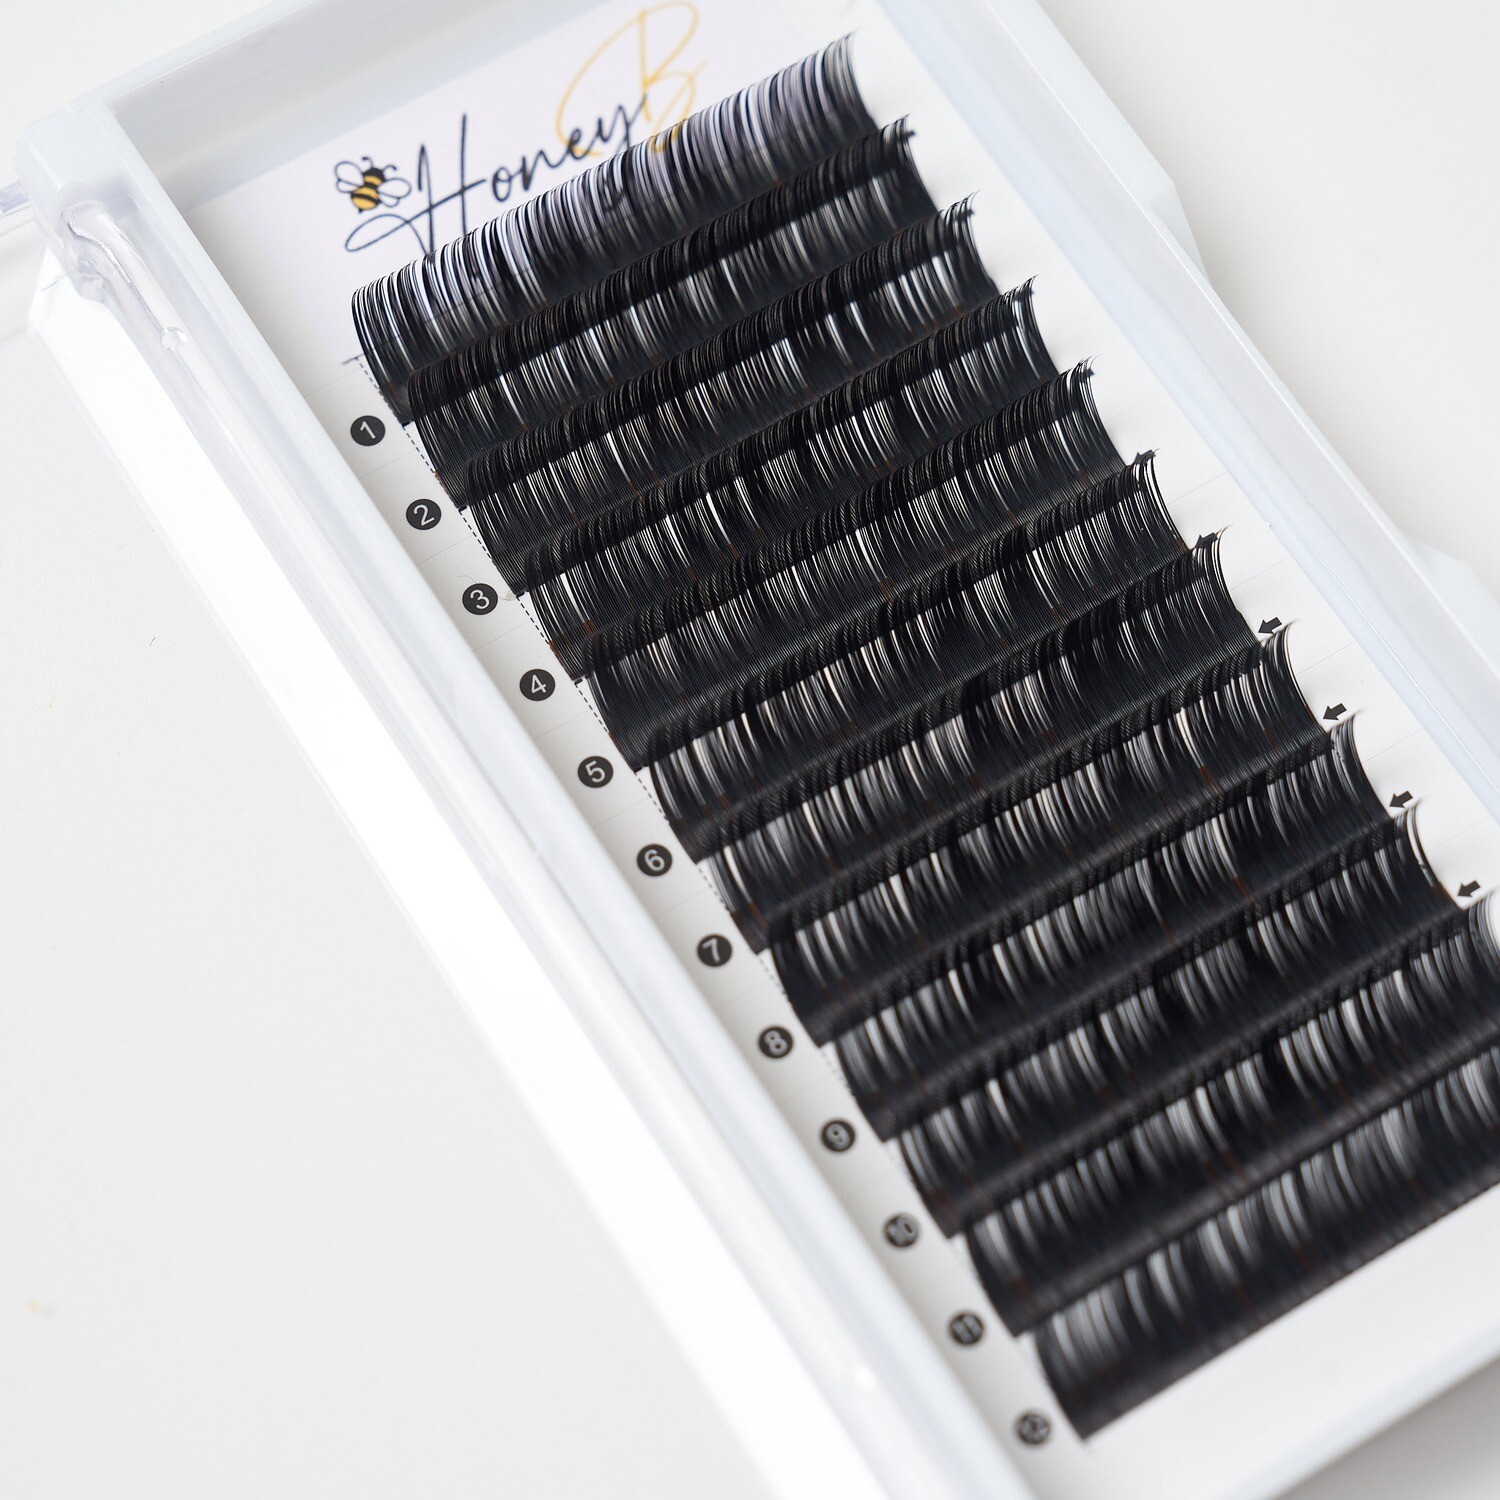 Classic Lash Extensions Mixed Tray 0.15mm